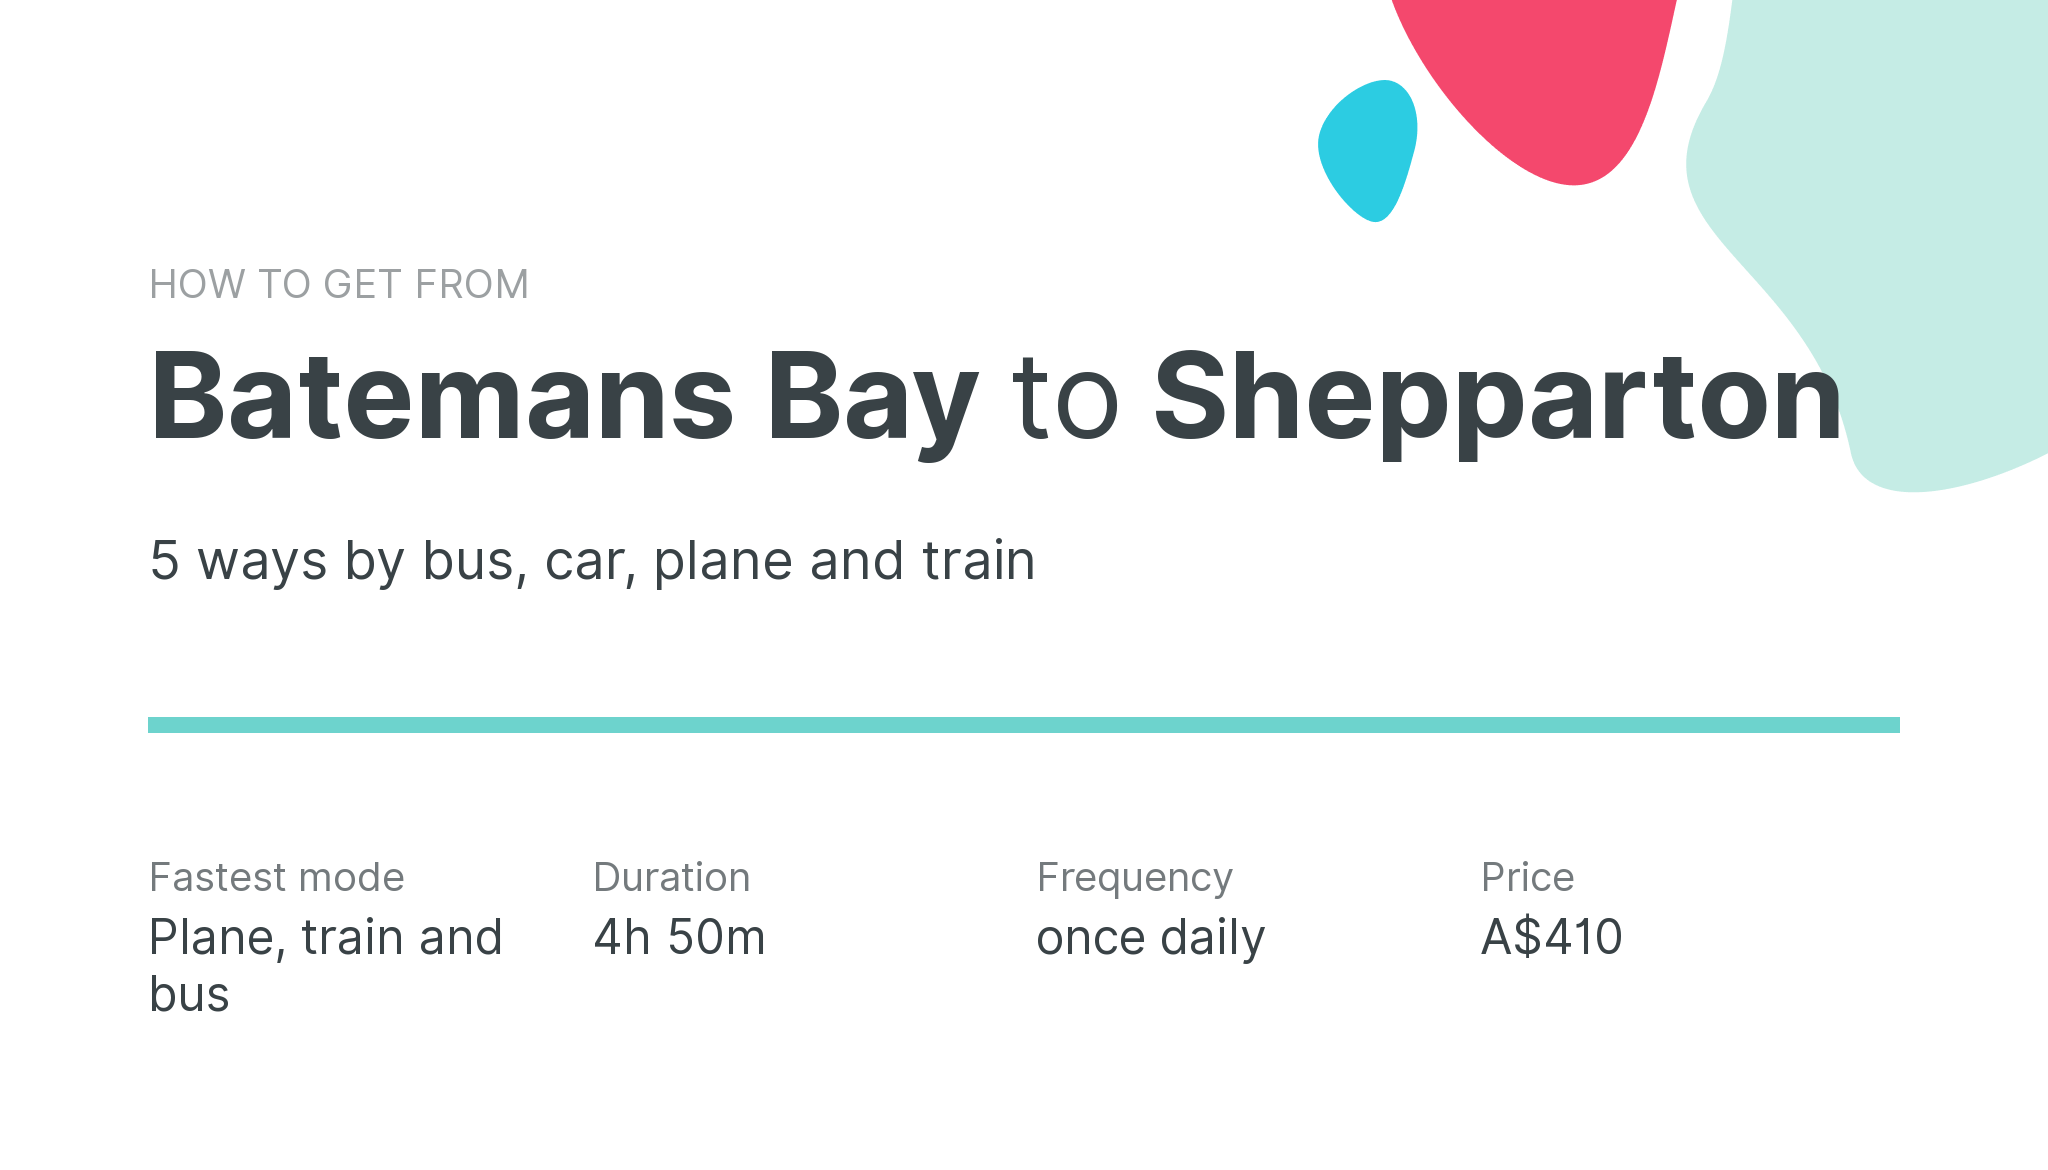 How do I get from Batemans Bay to Shepparton